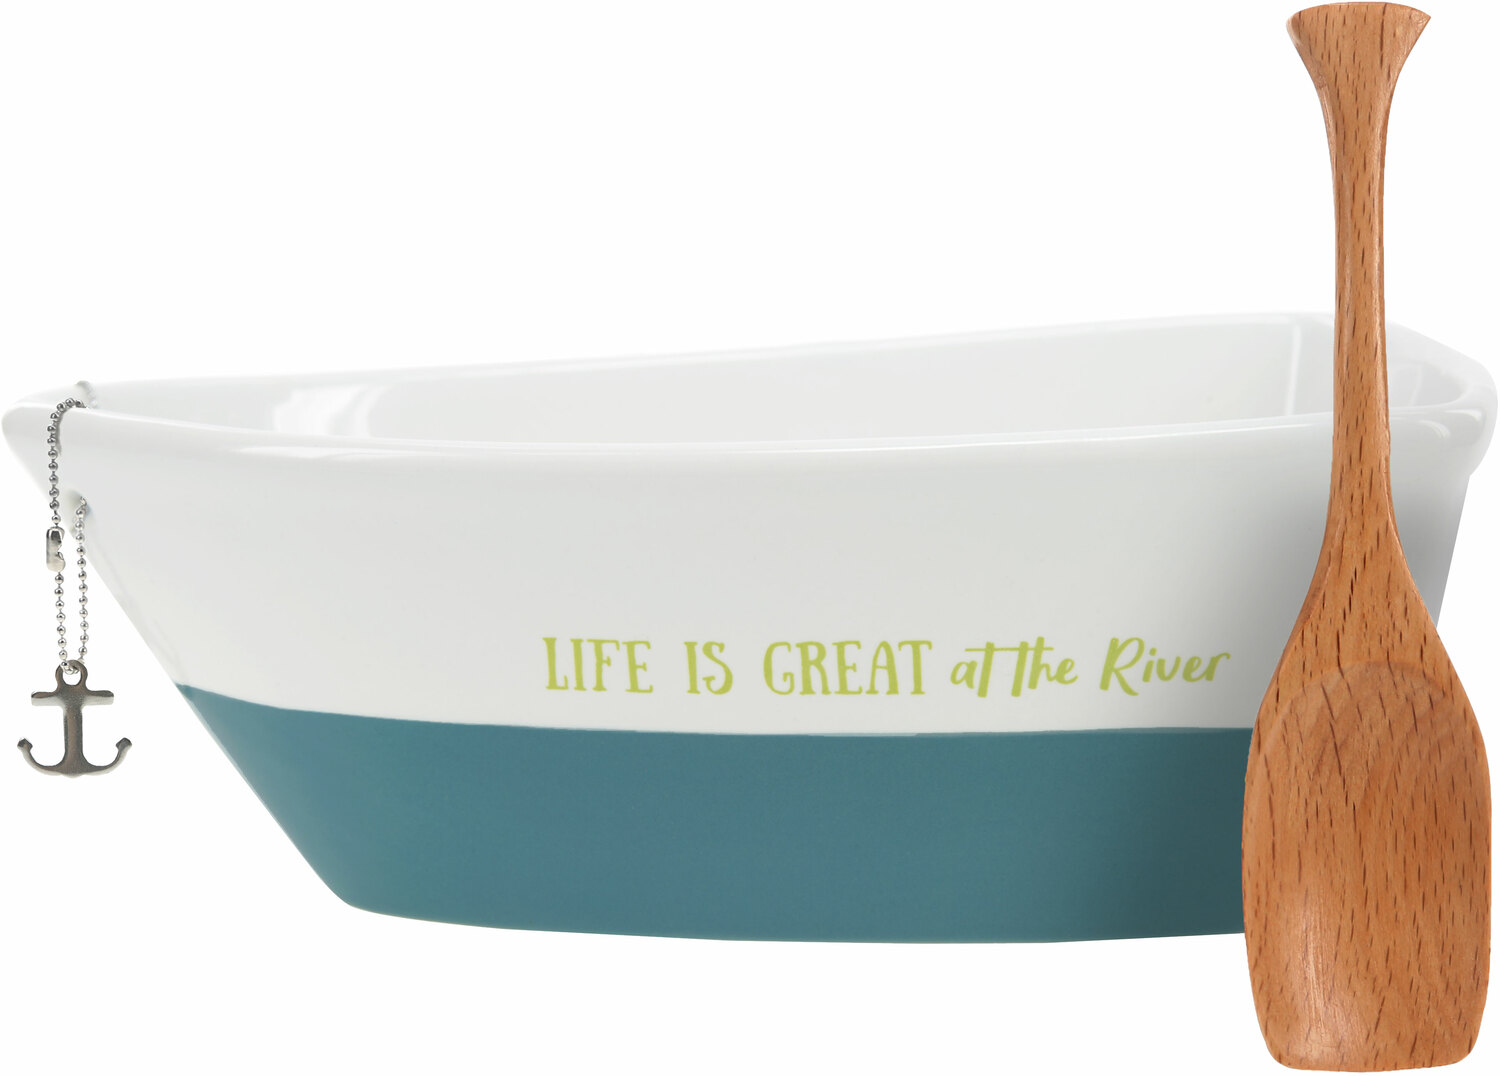 At the River by We People - At the River - 7" Boat Serving Dish with Oar